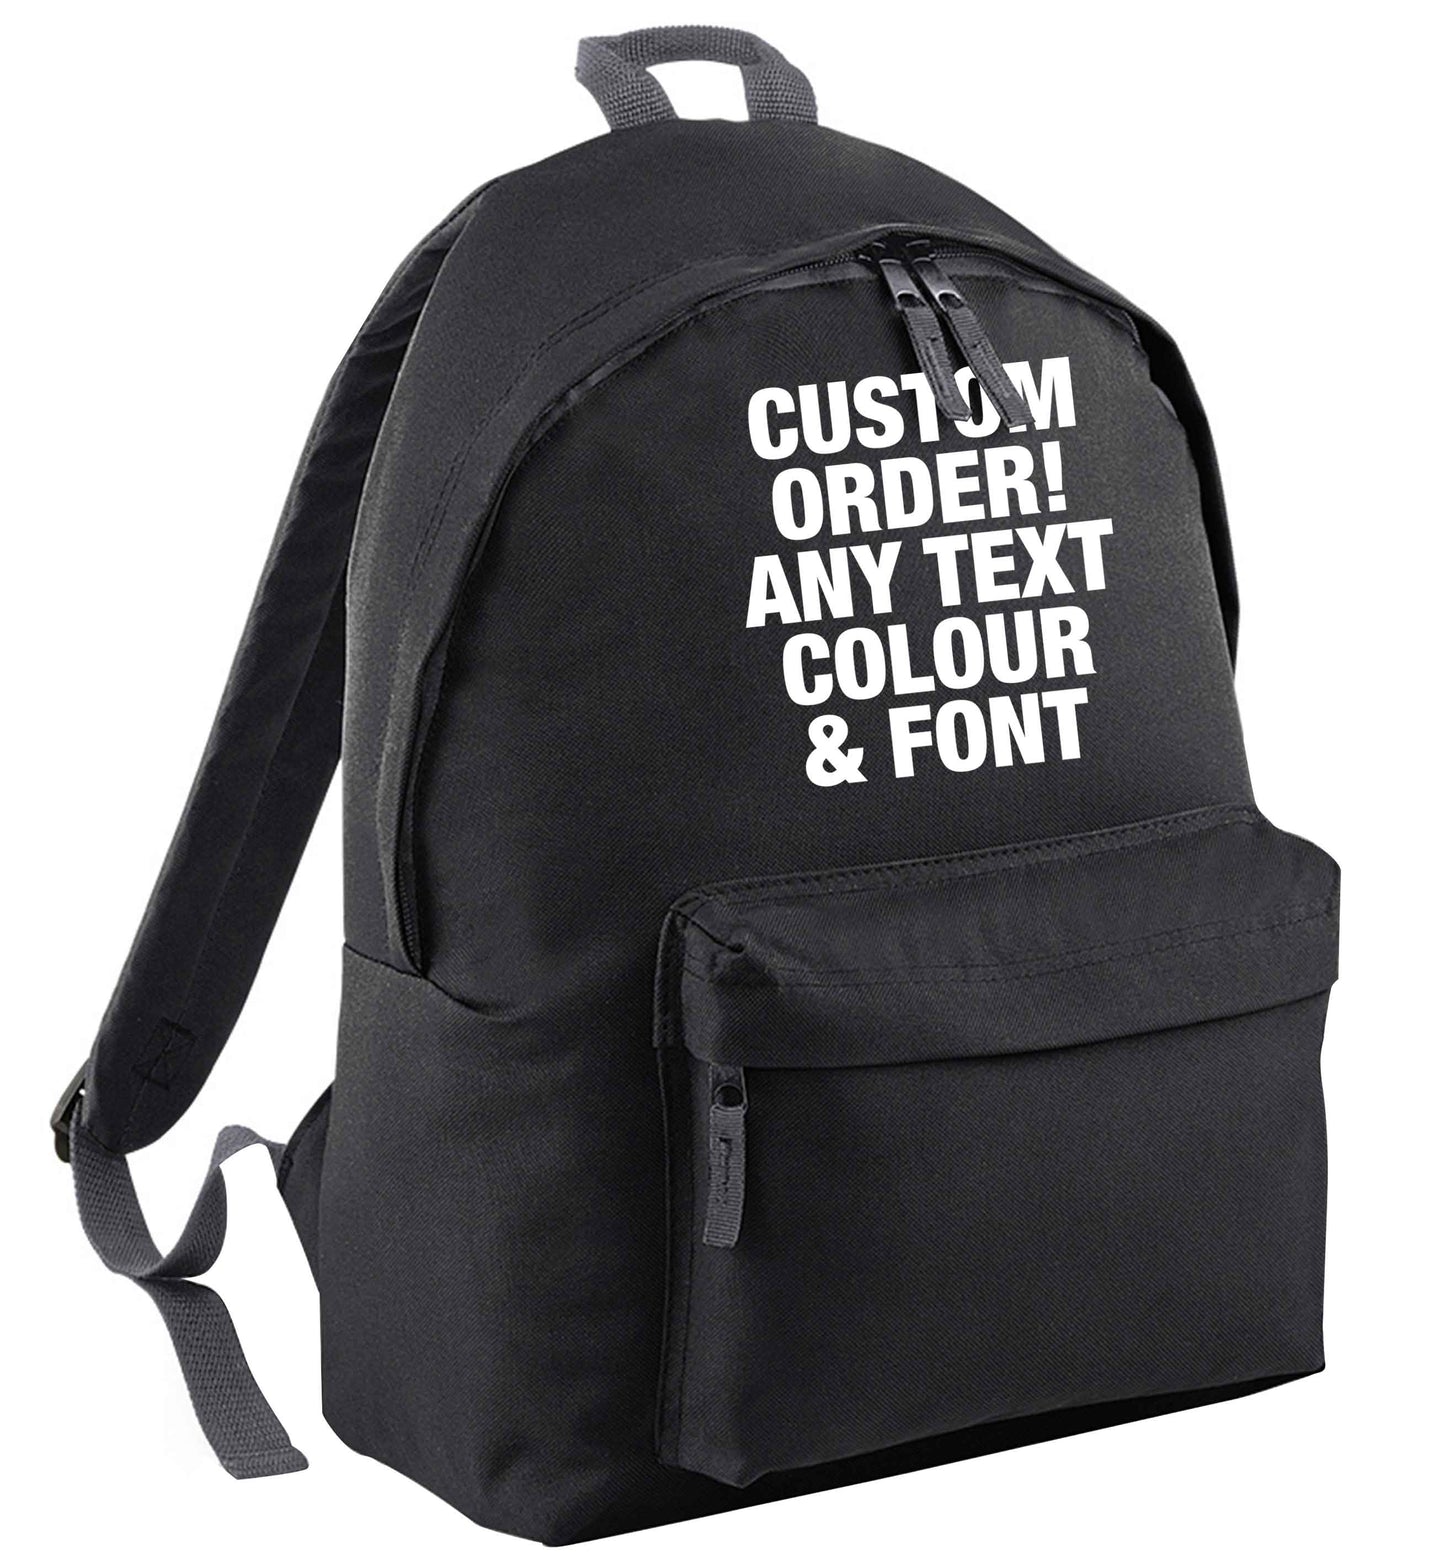 Custom order any text colour and font black adults backpack